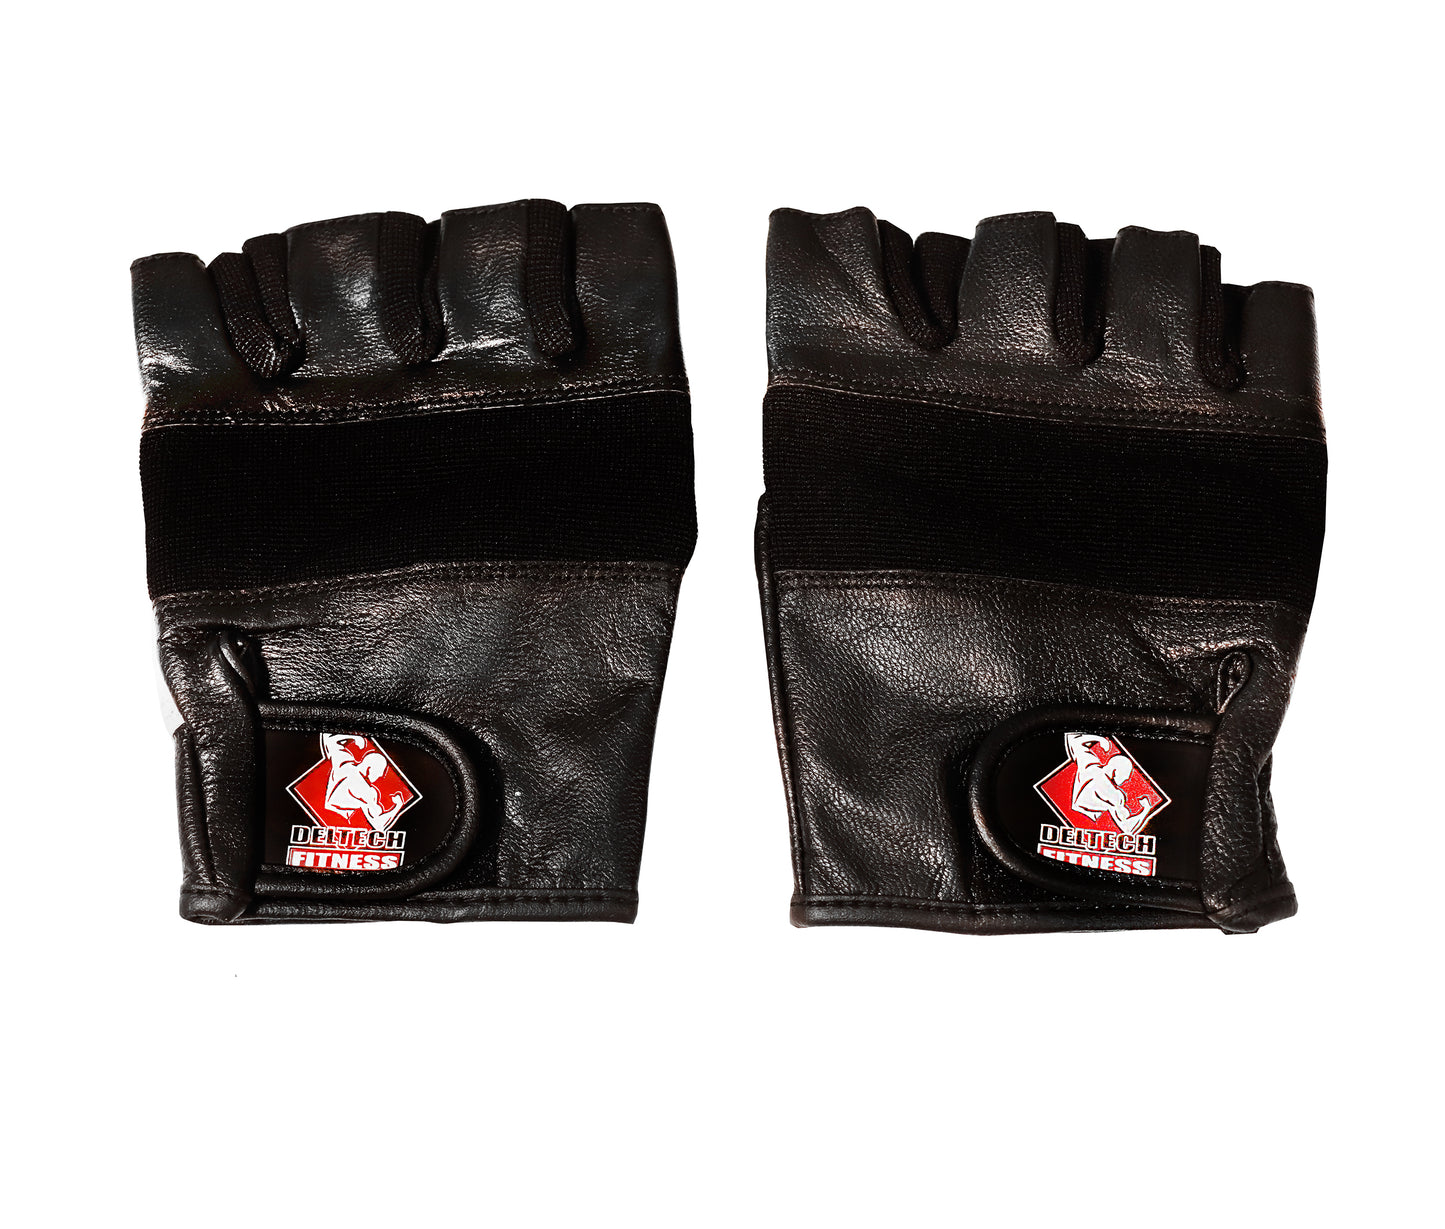 Deltech Fitness Heavy-Duty Weightlifting Gloves (LT-1013)